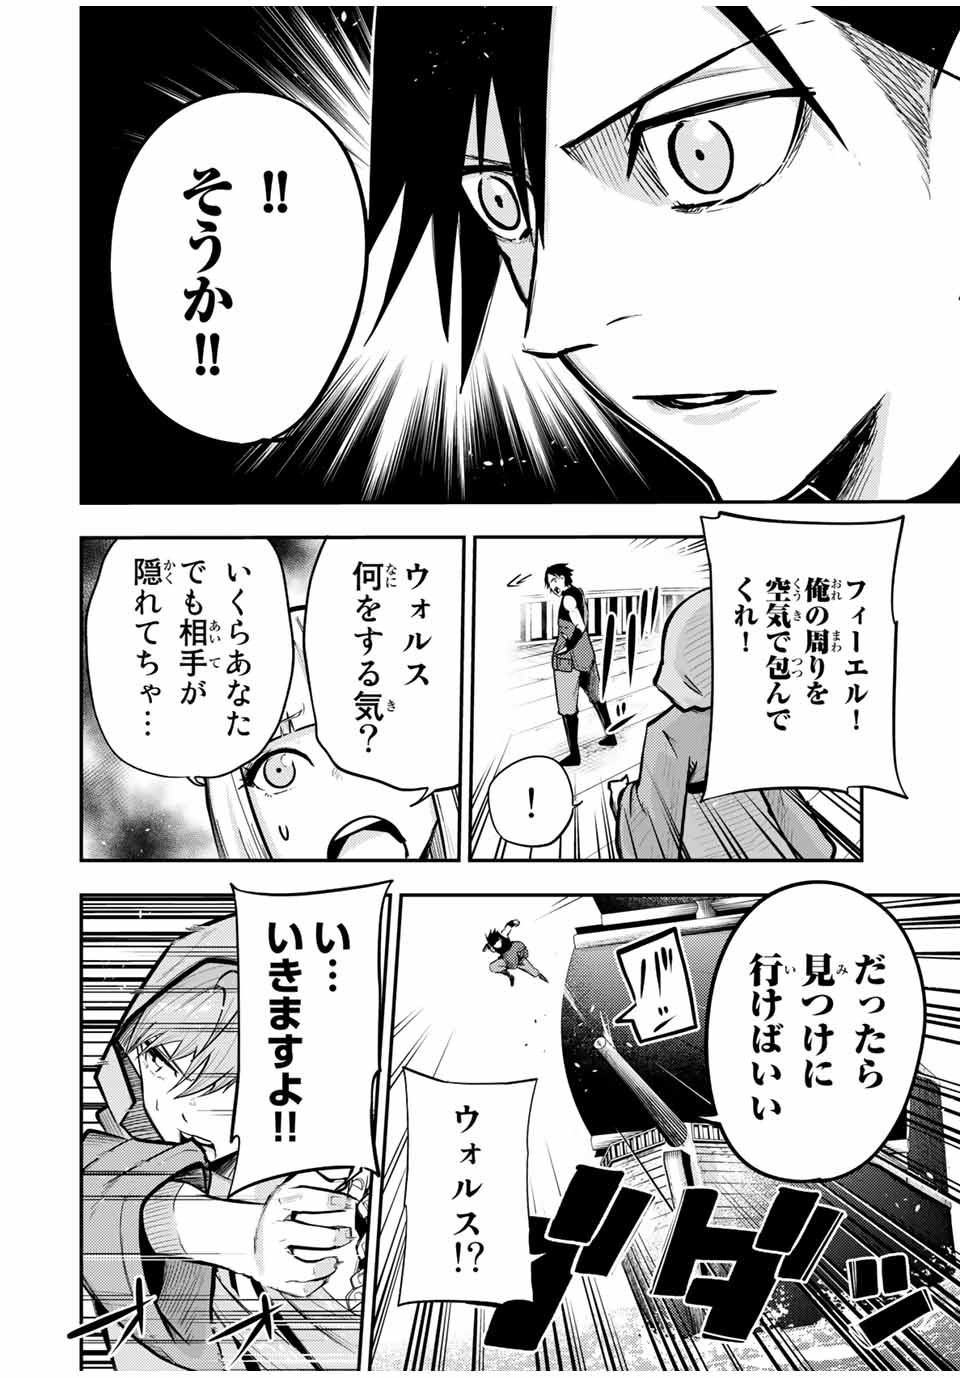 the strongest former prince-; 奴隷転生 ～その奴隷、最強の元王子につき～ 第40話 - Page 10